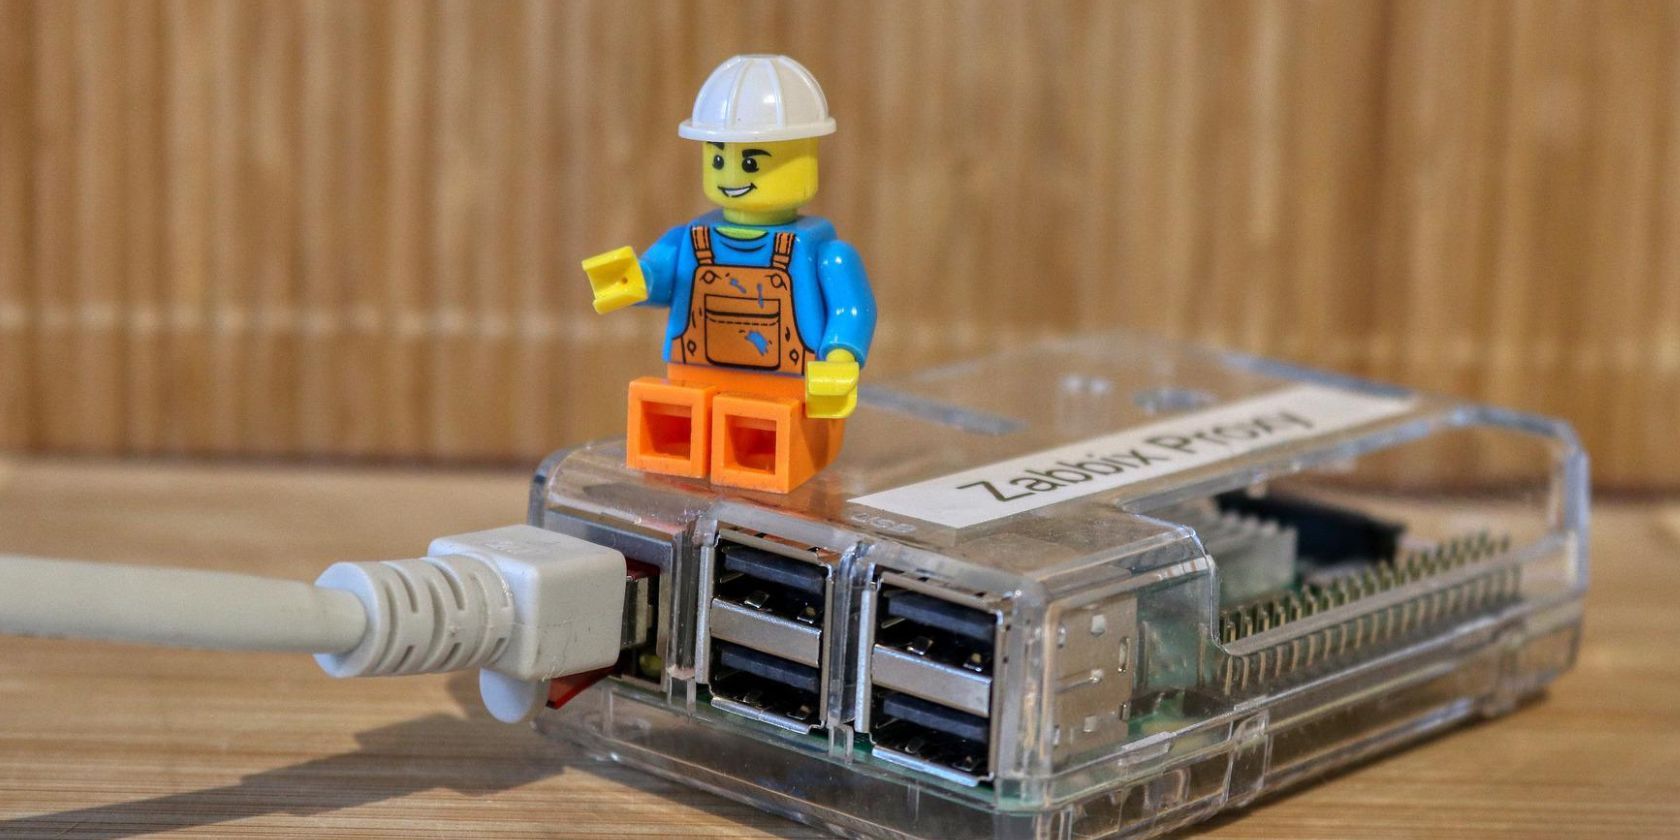 A Raspberry Pi in a case with a LEGO mini figure sitting on top